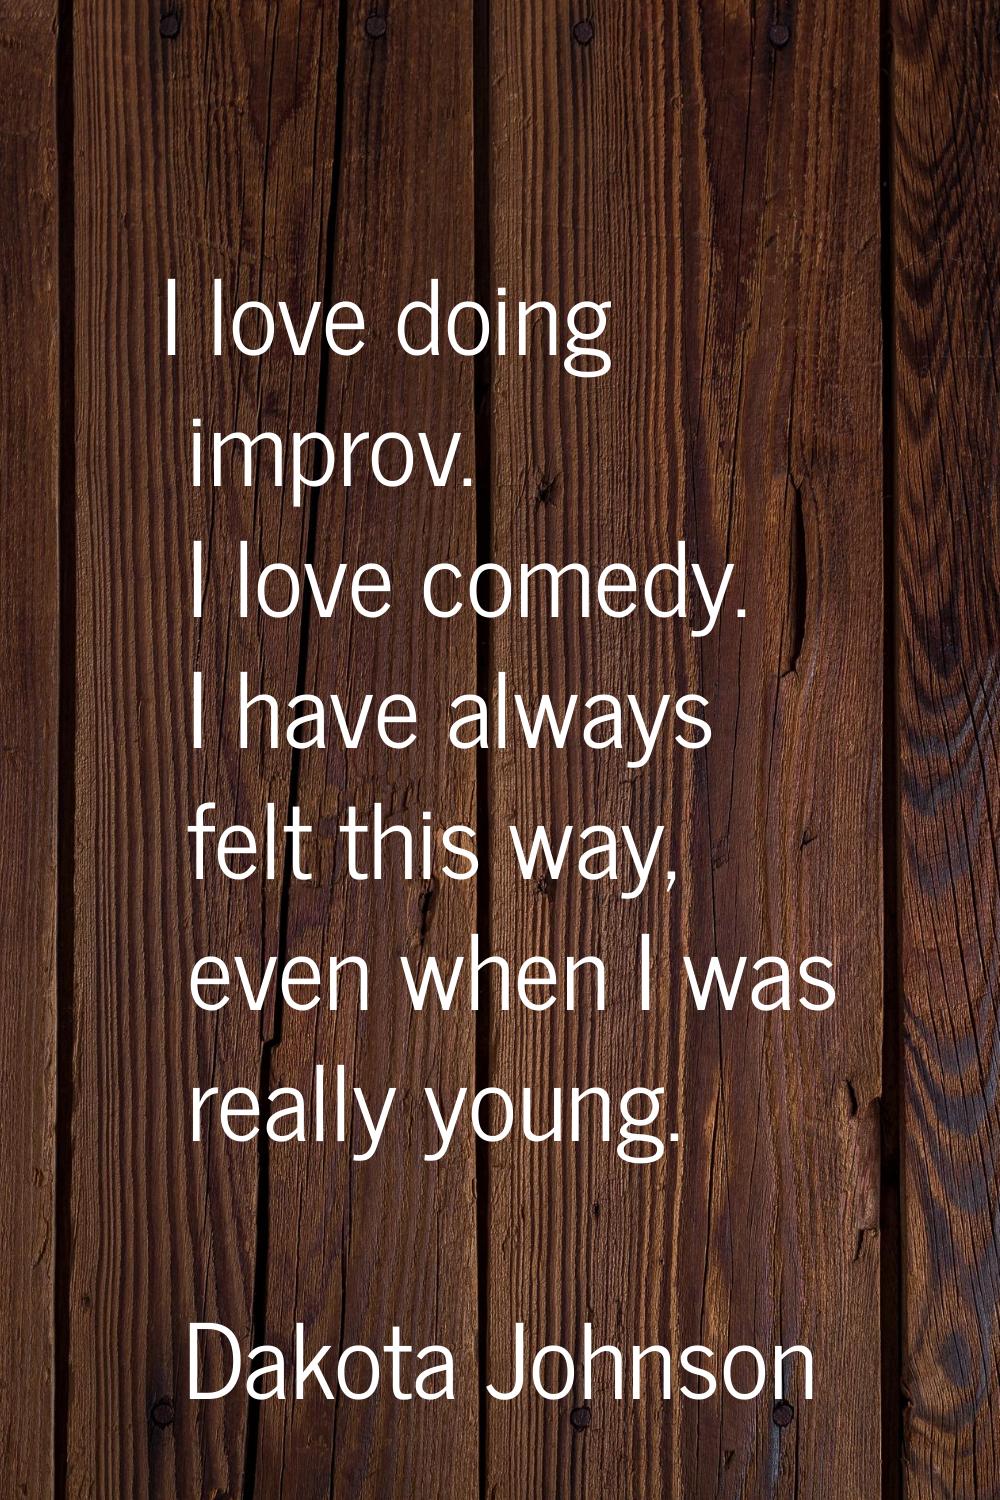 I love doing improv. I love comedy. I have always felt this way, even when I was really young.